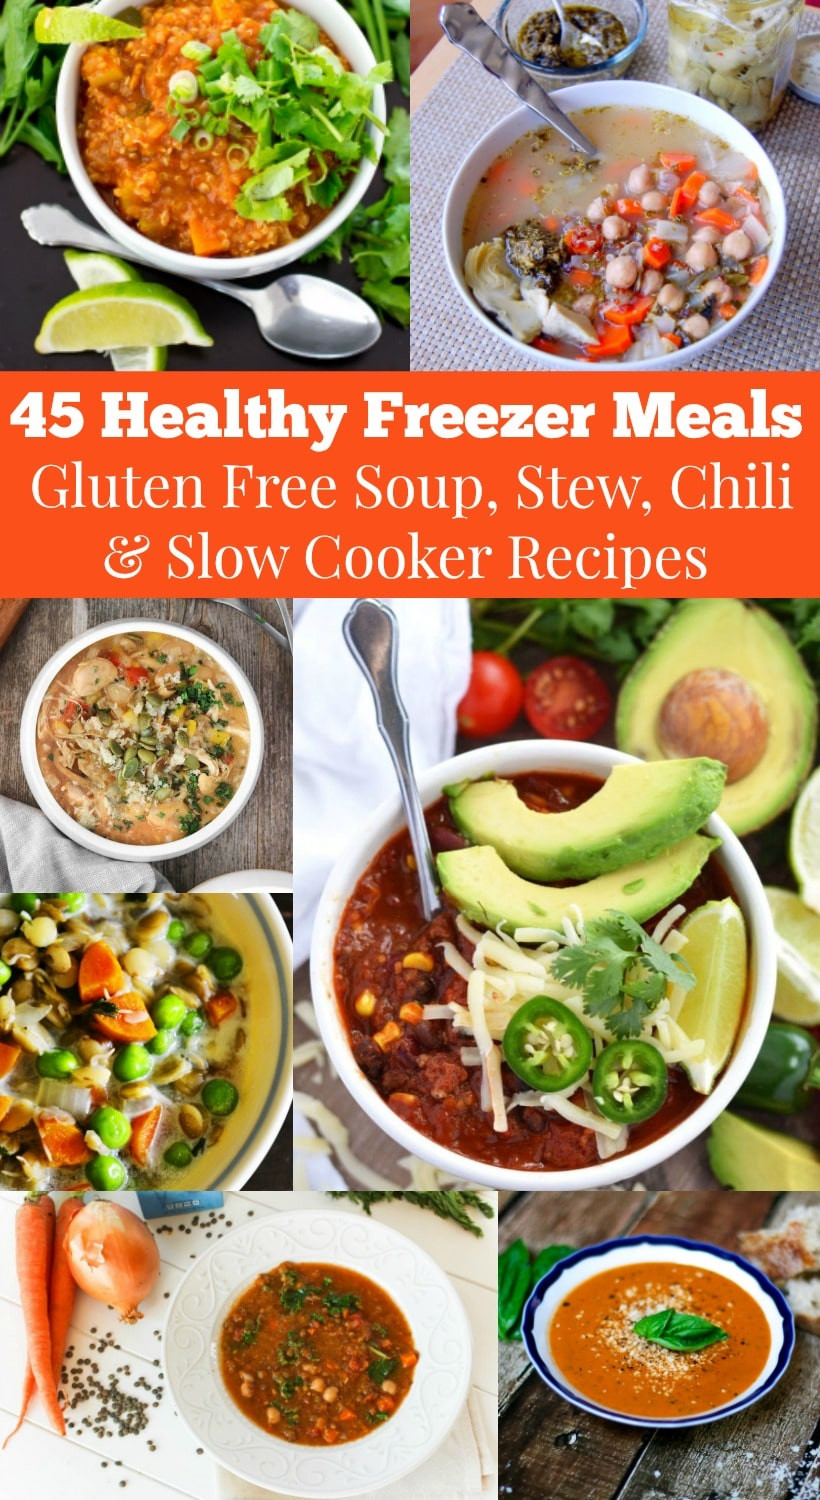 Make Ahead Dinner Recipe
 45 Healthy Freezer Meals to Help You Reclaim Dinner Time